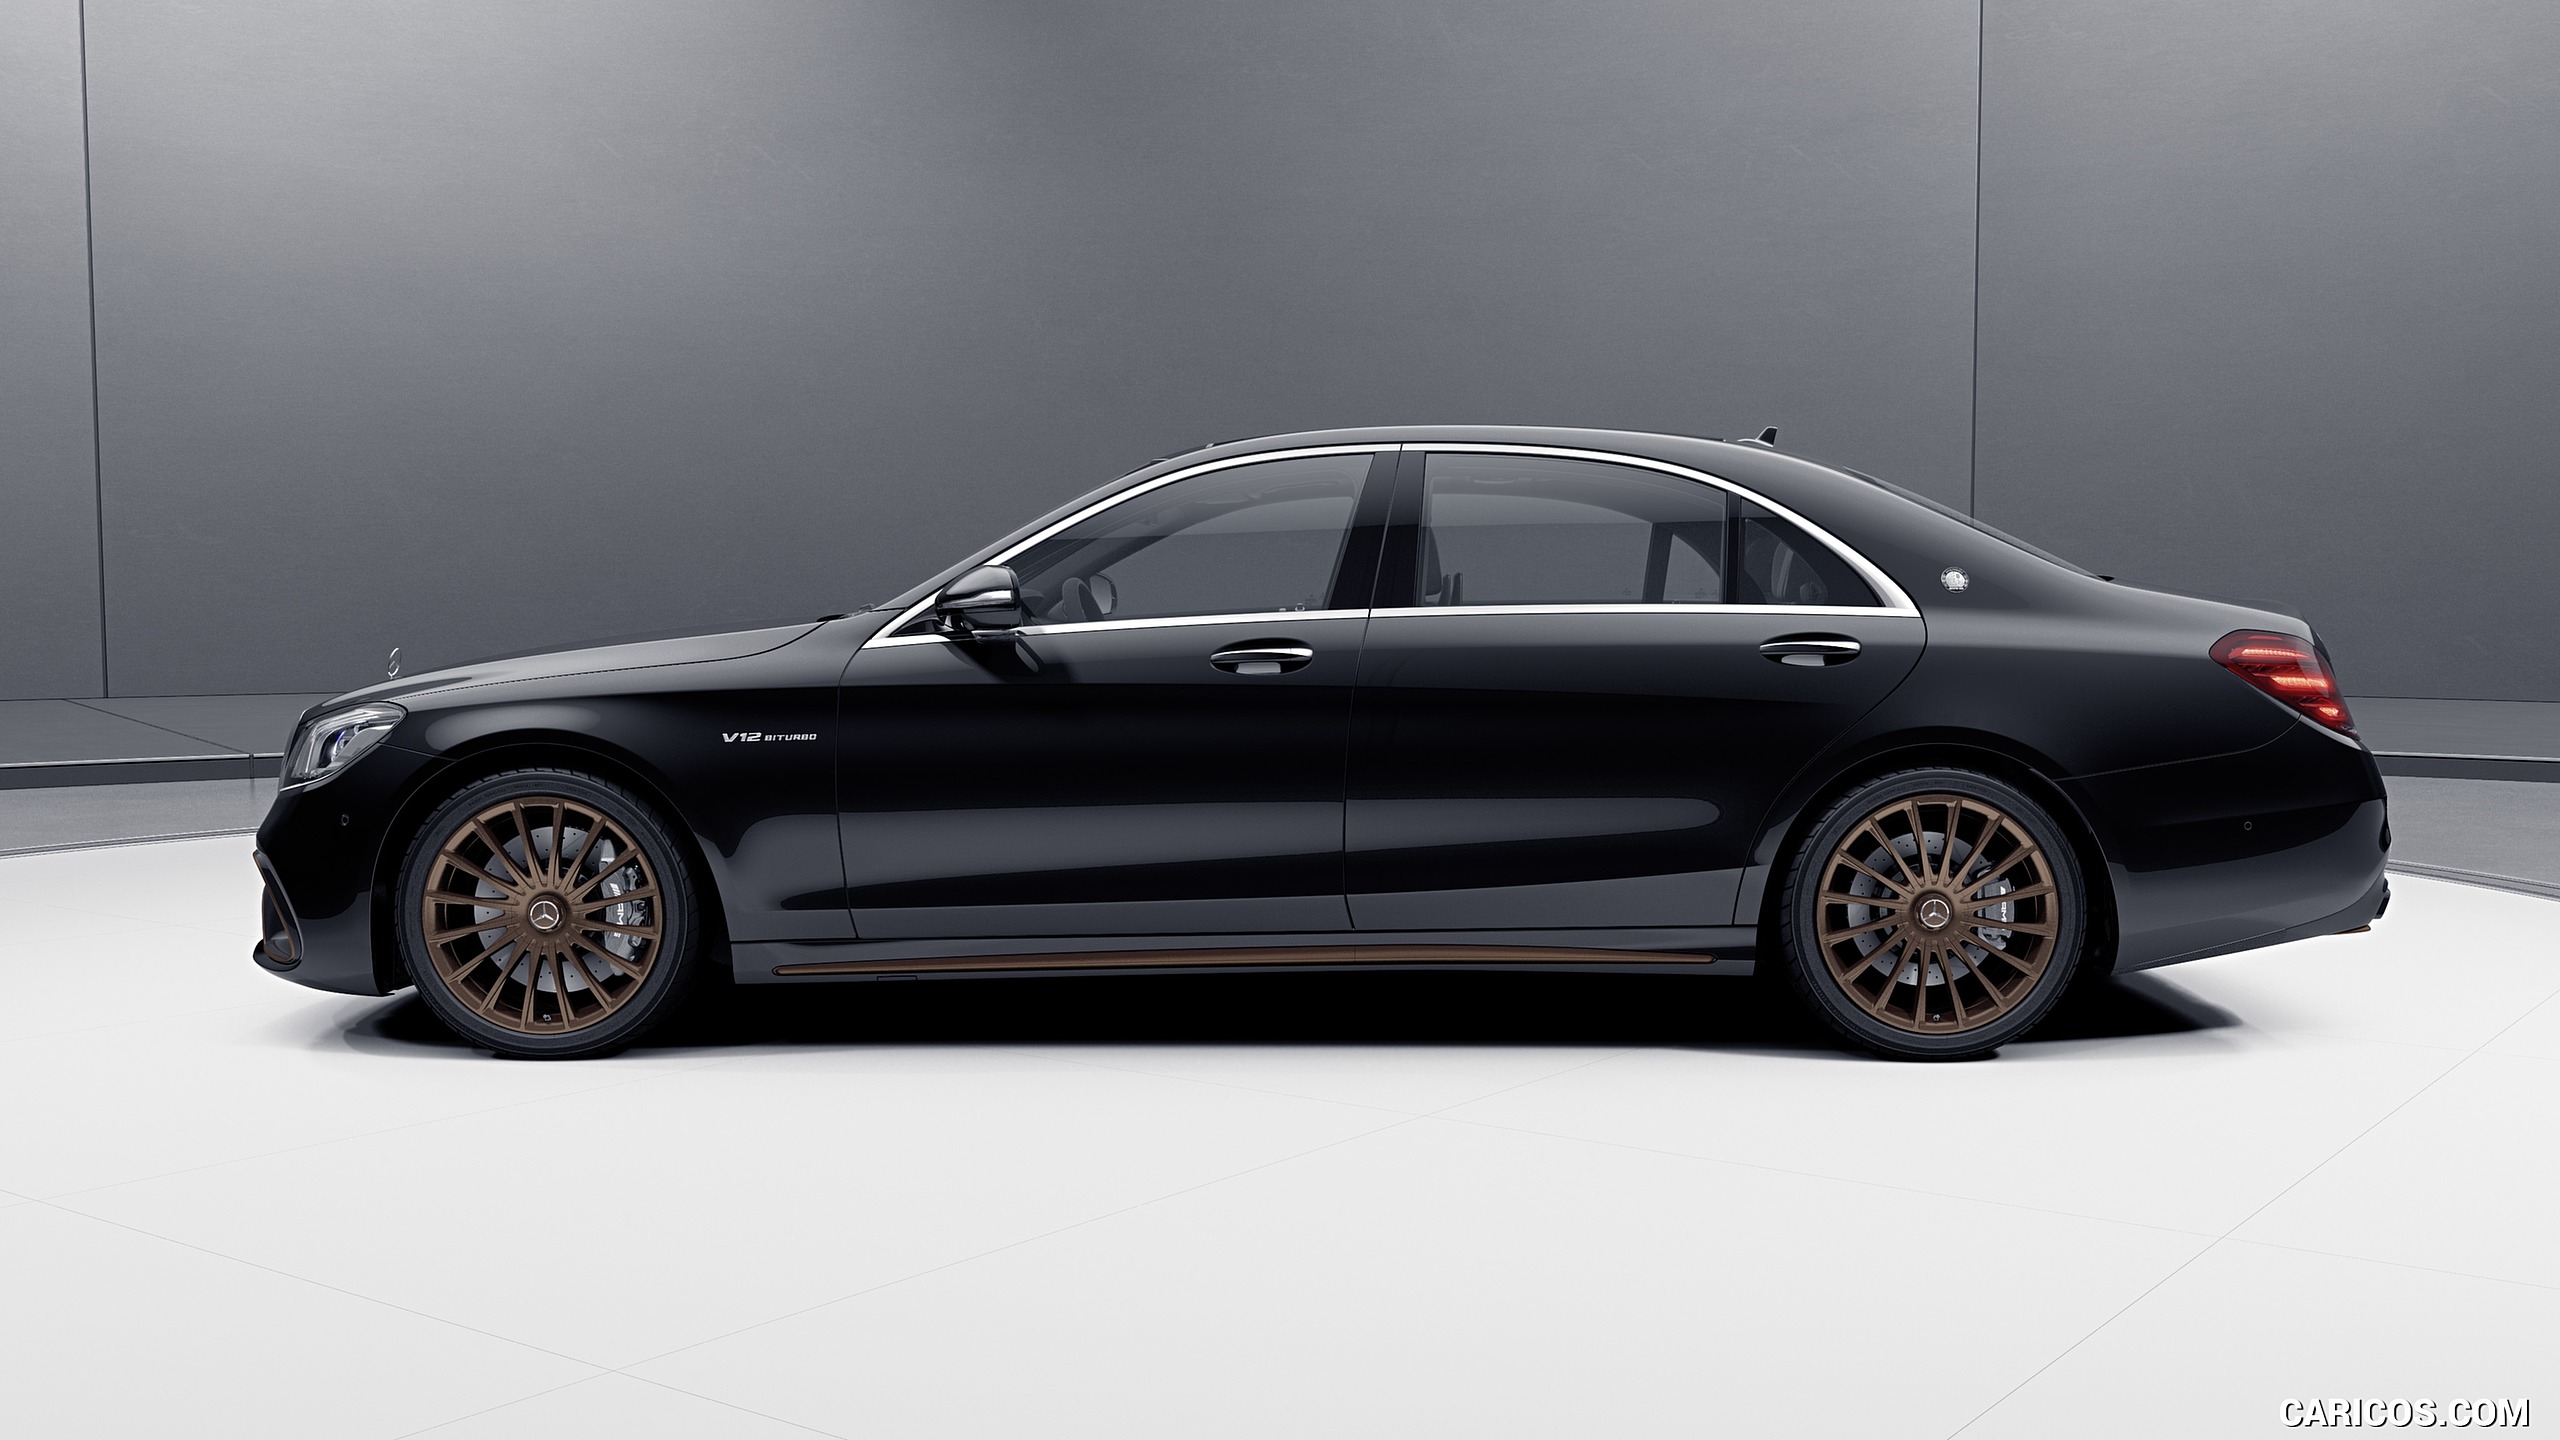 2019 Mercedes-AMG S 65 Final Edition - Side, #3 of 10